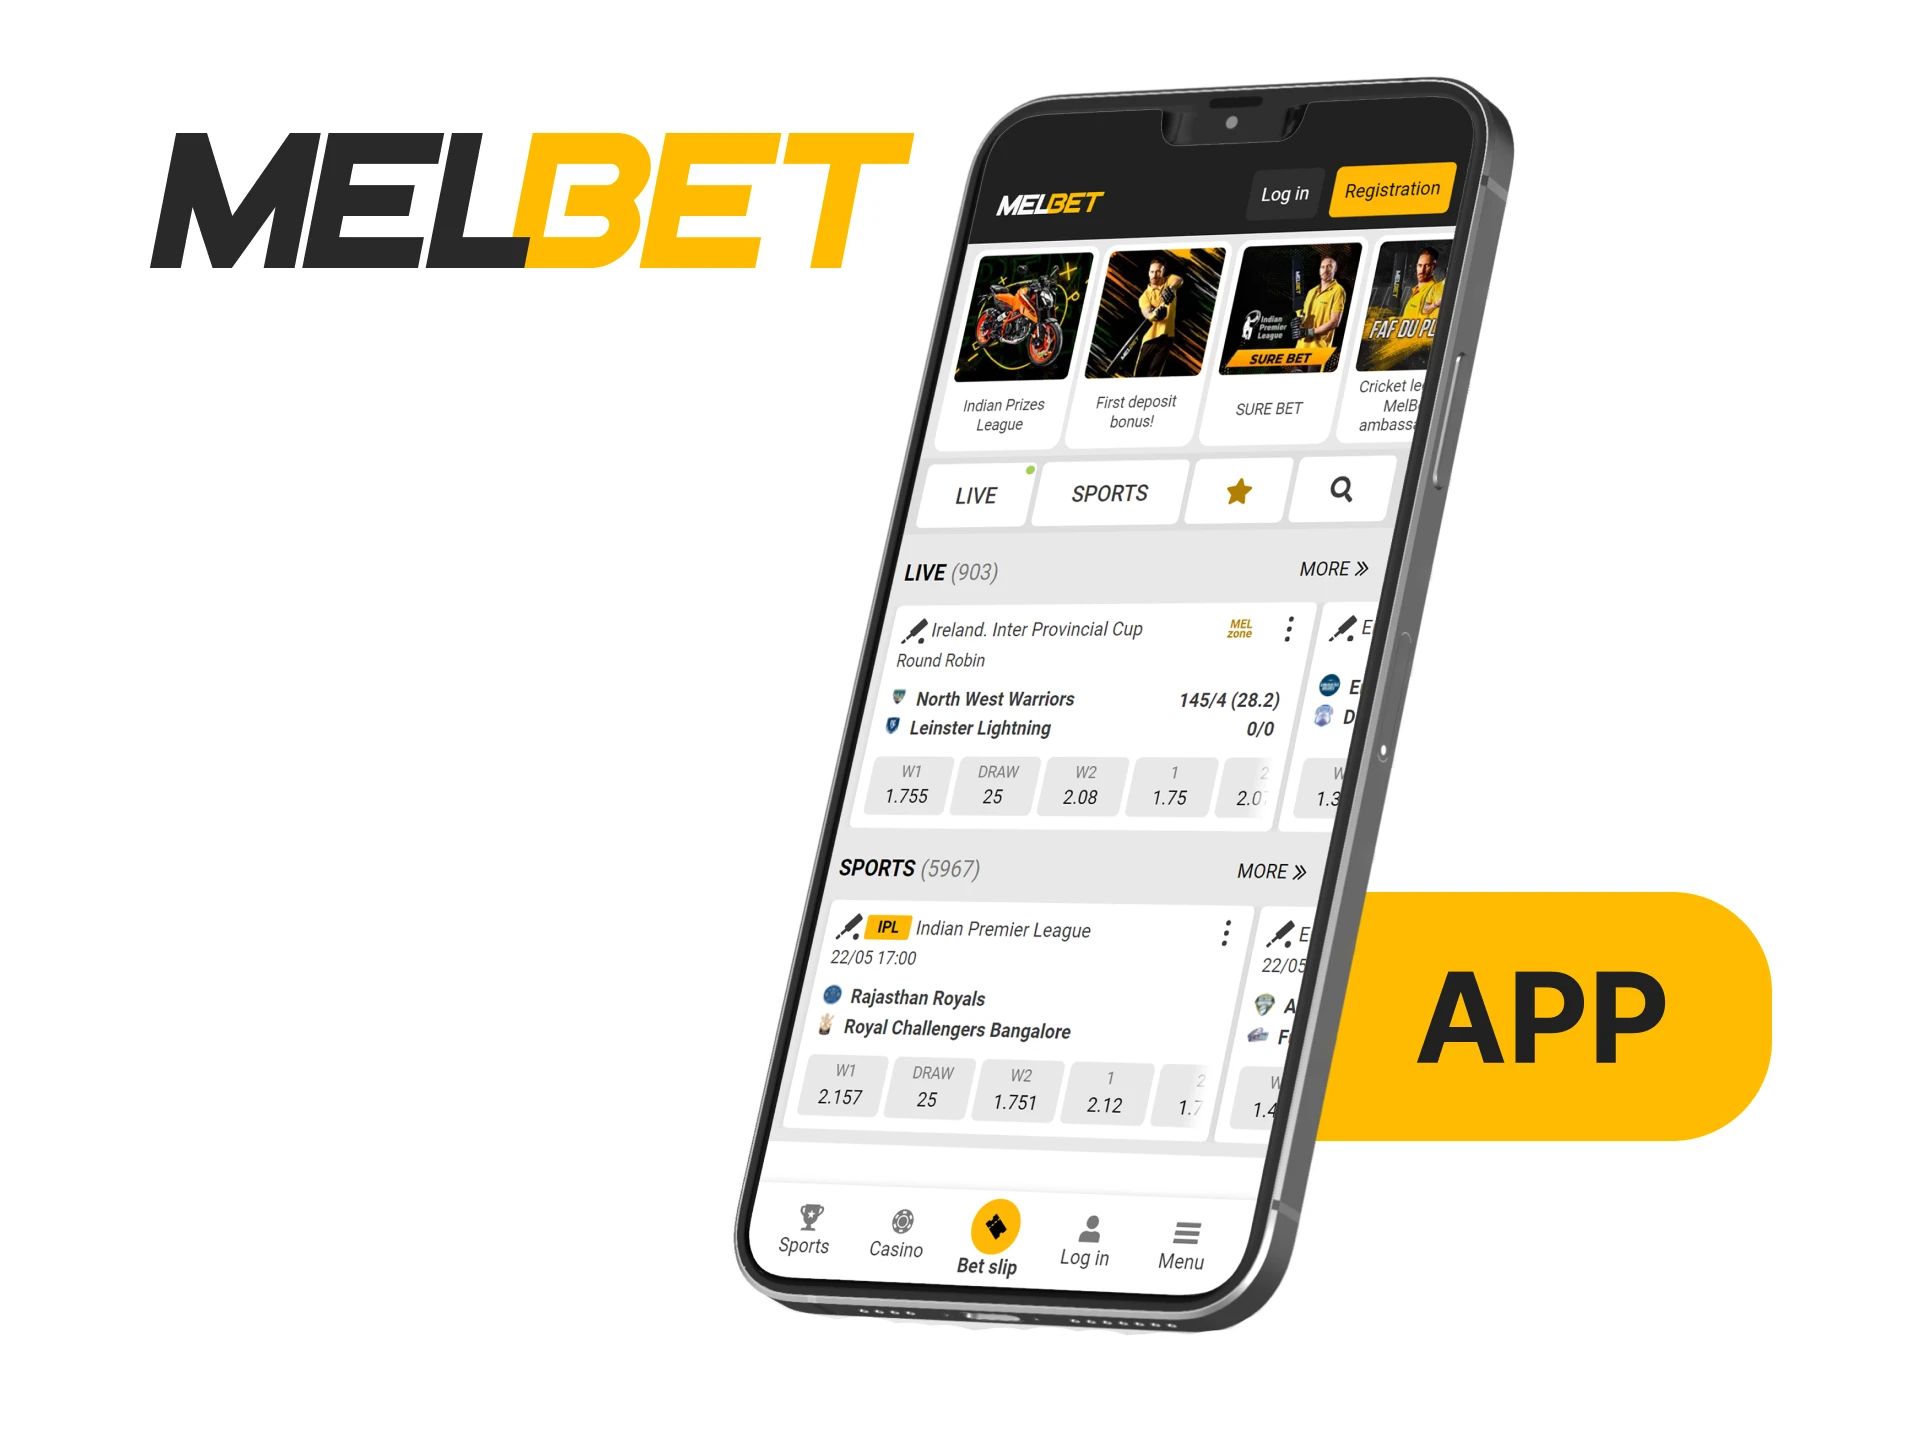 Melbet app, the best choice for betting on cricket via mobile app.